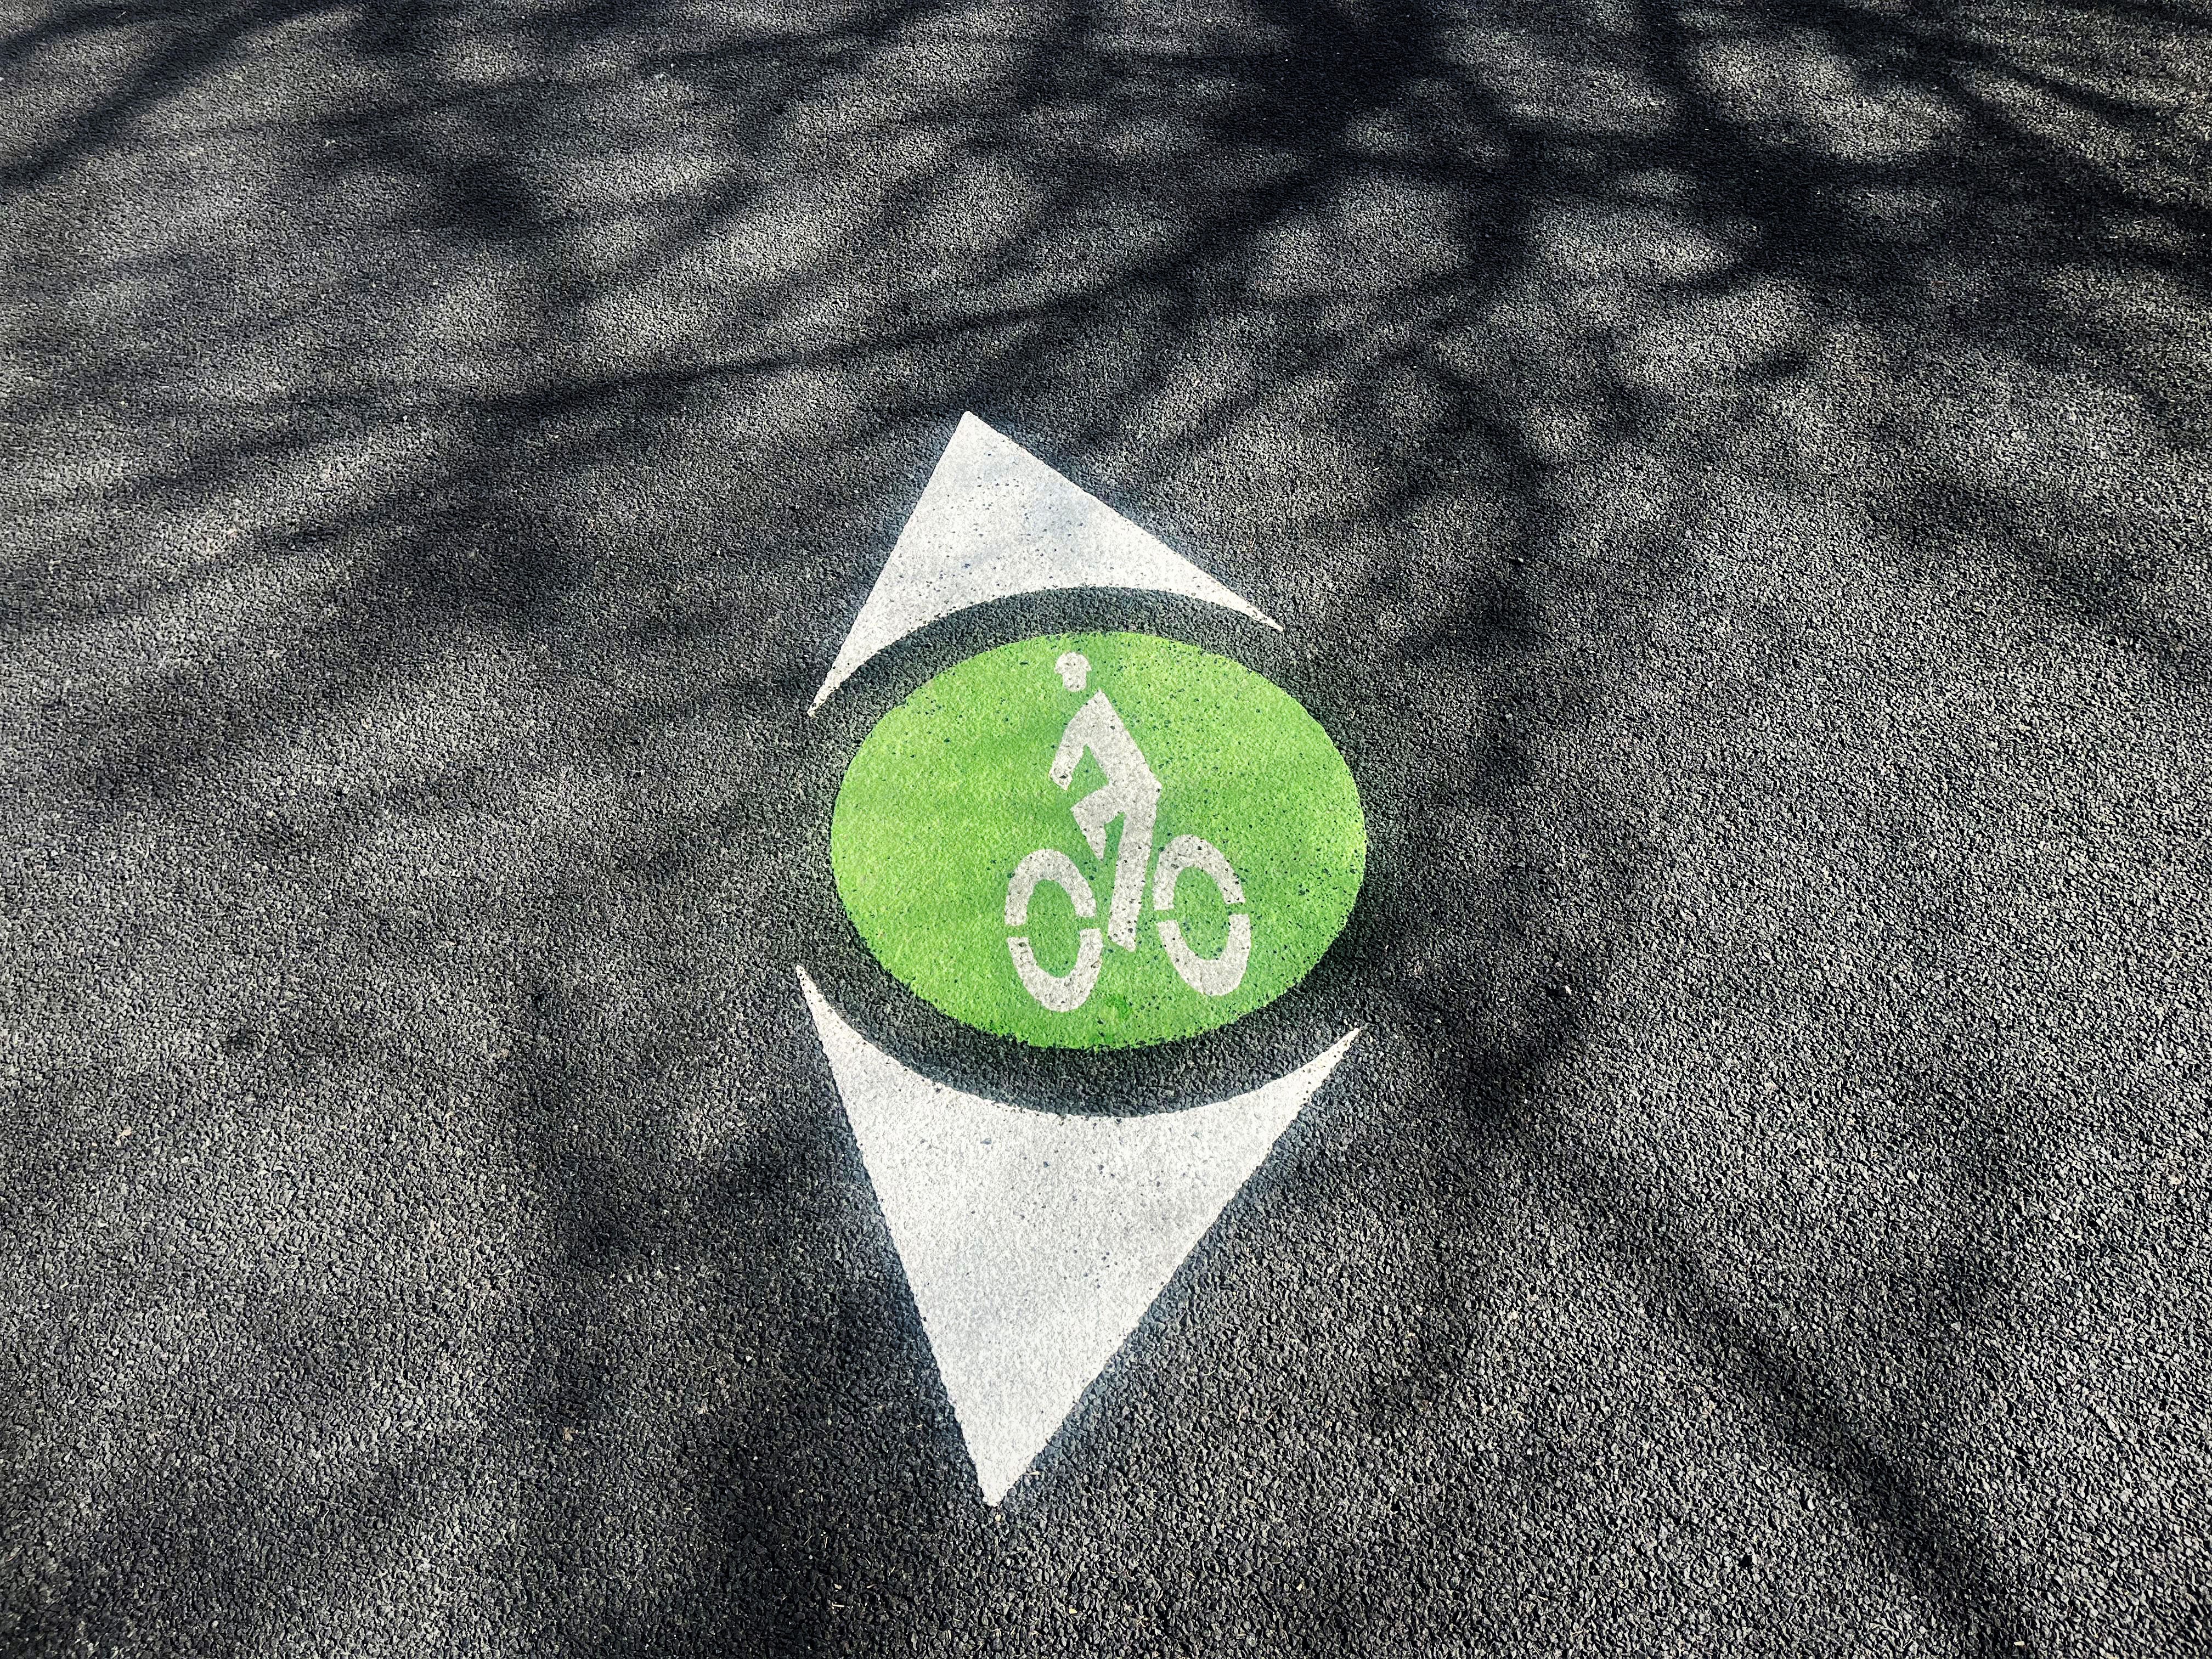 green wayfinding symbol on the road